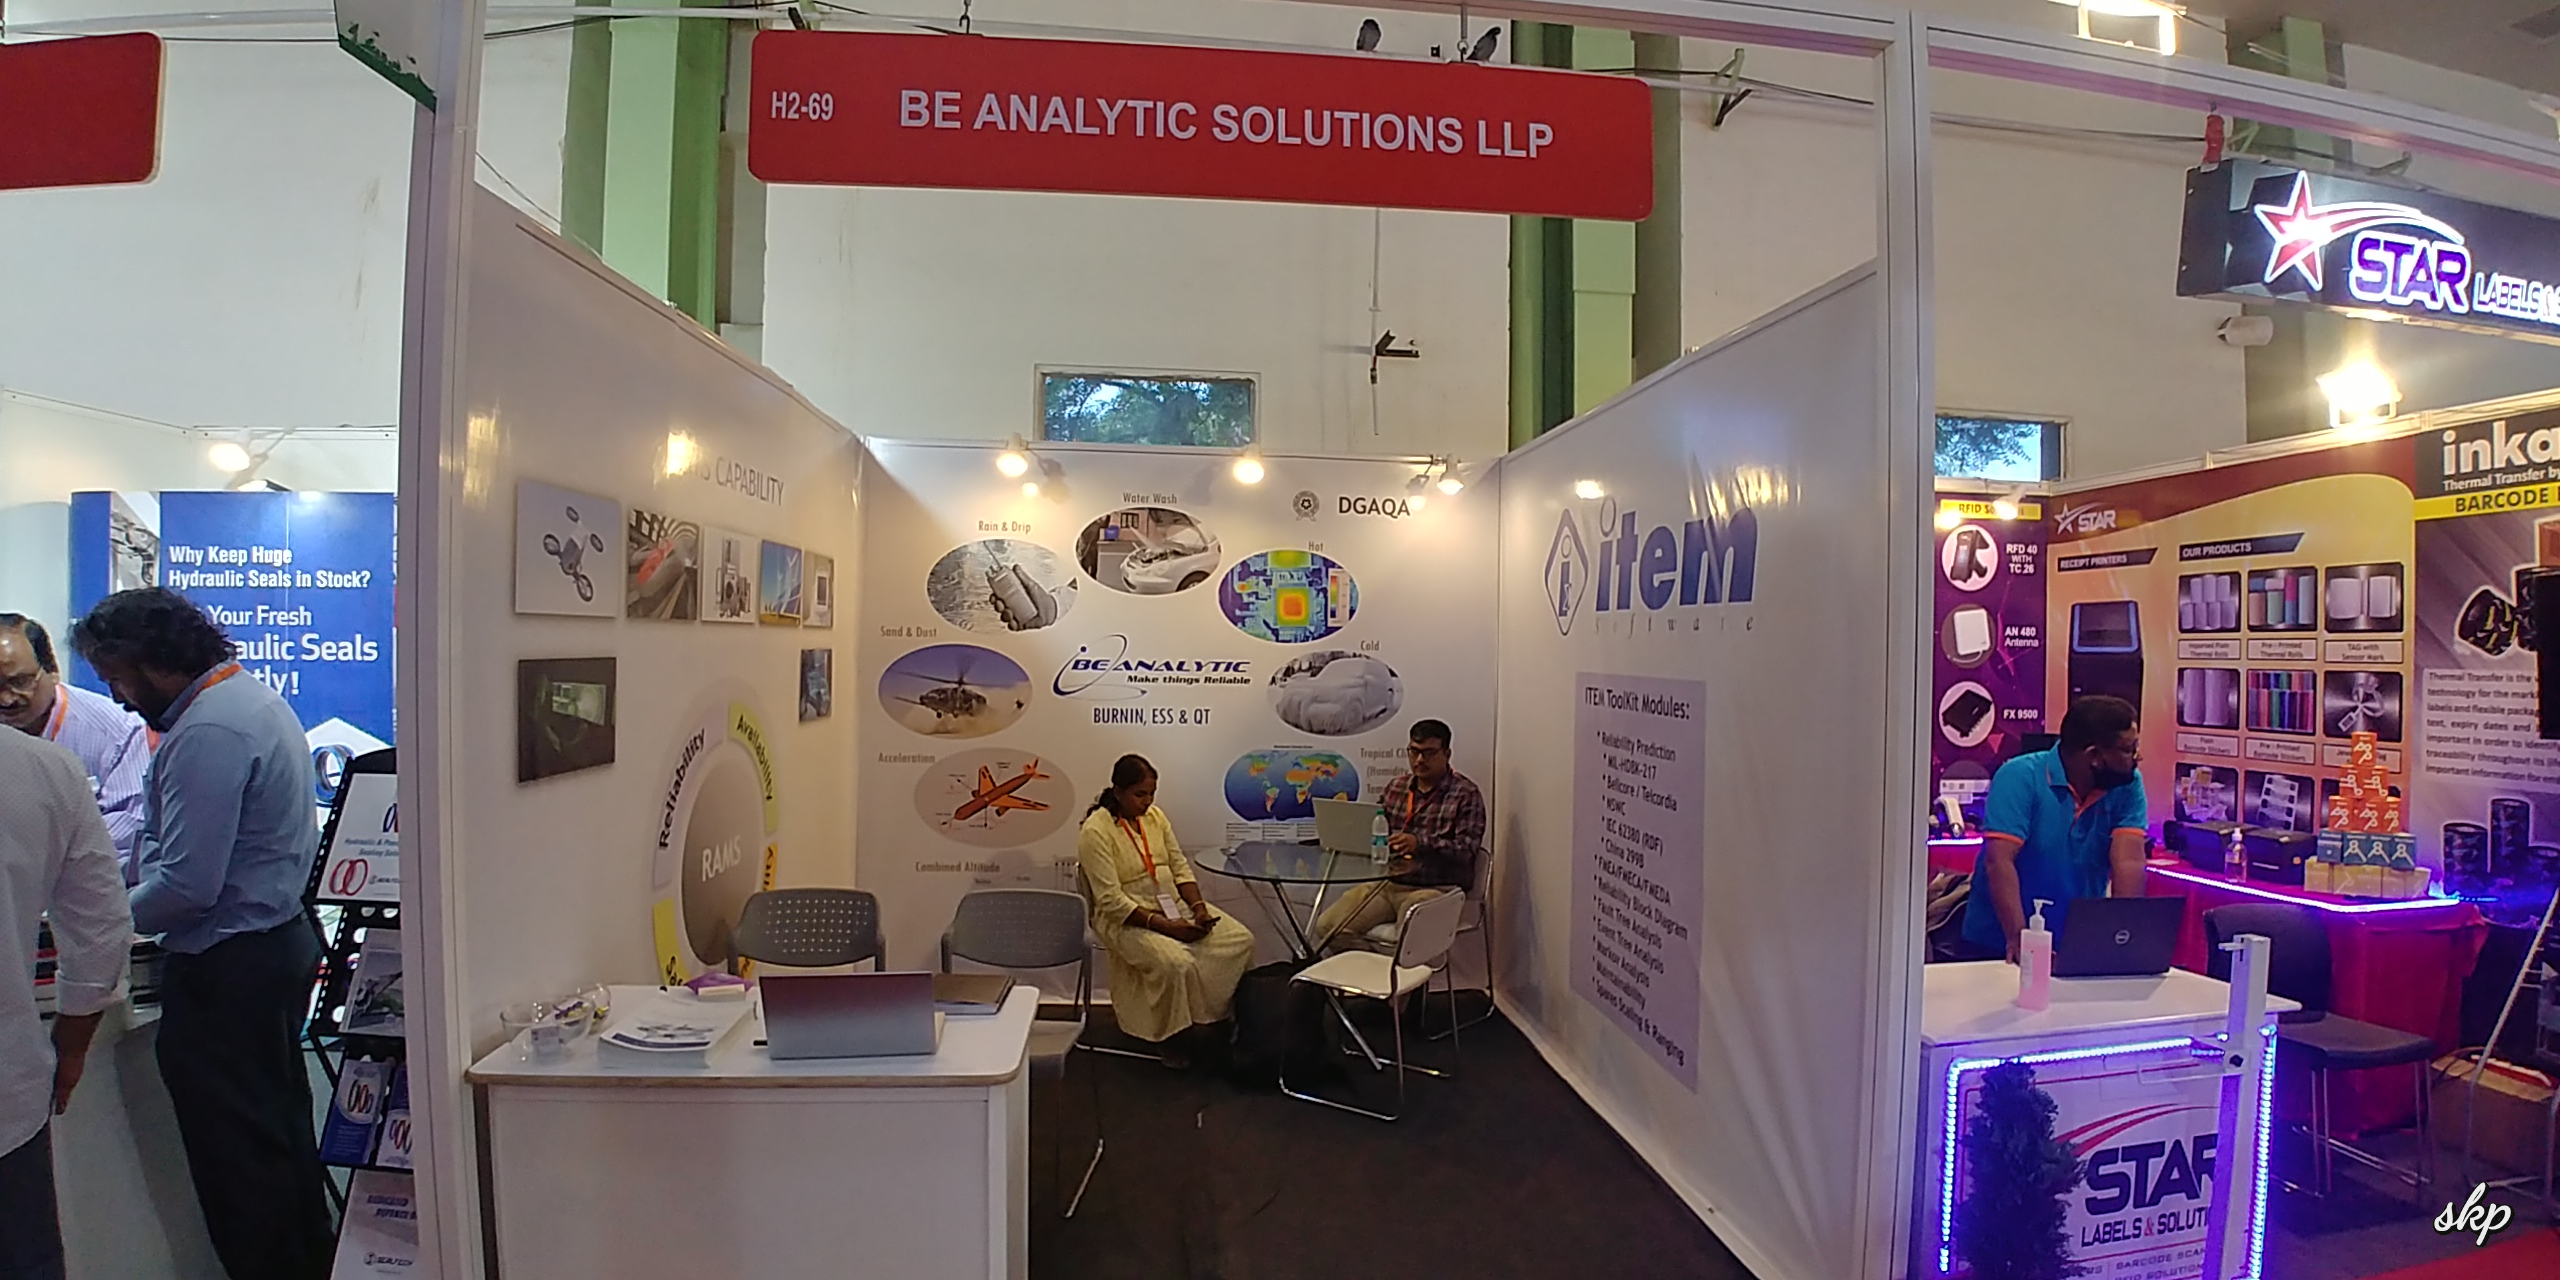 BE Analytic Solutions